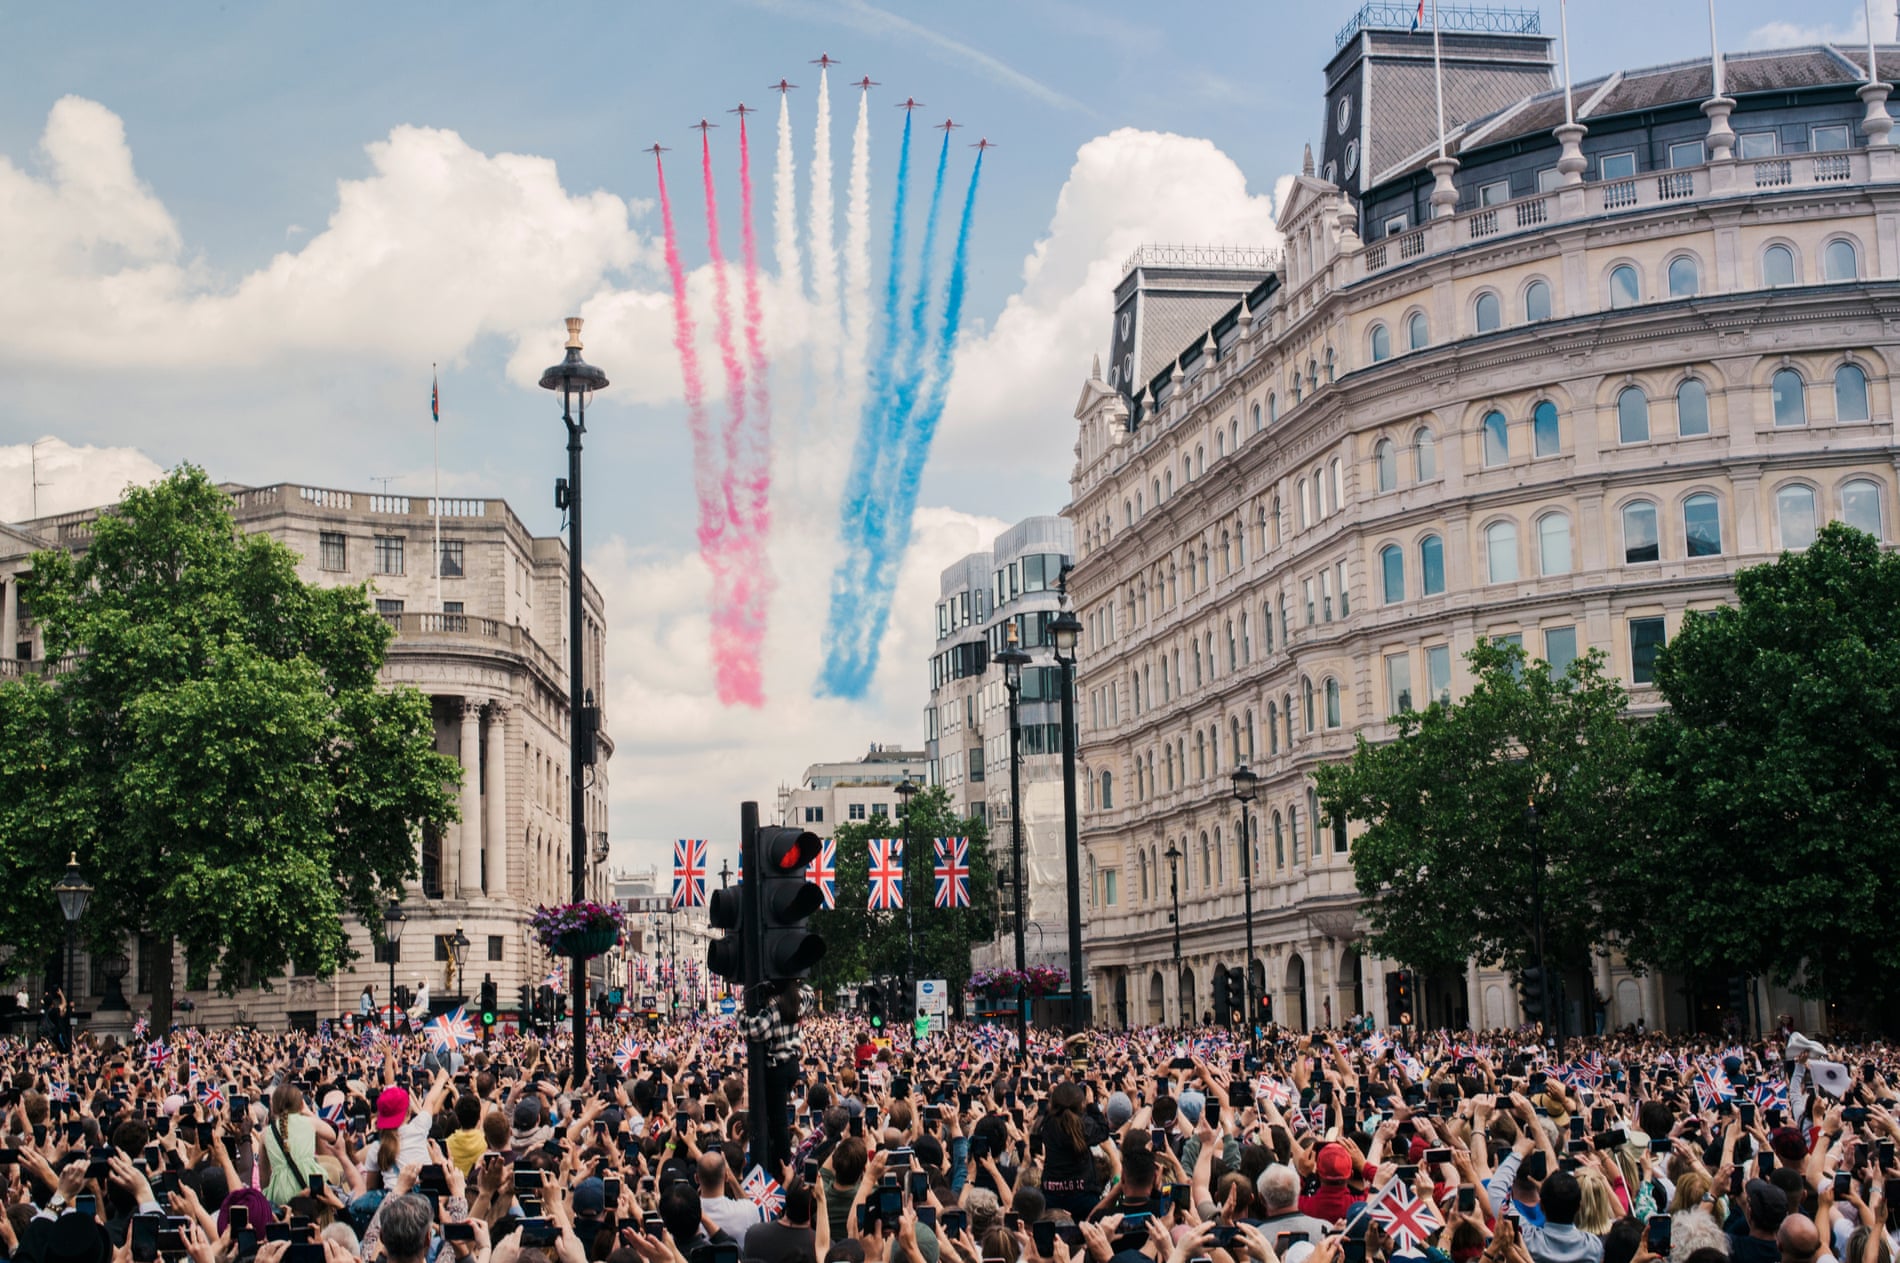 The Red Arrows fly past Trafalgar Square leaving red, white, and blue vapour trails